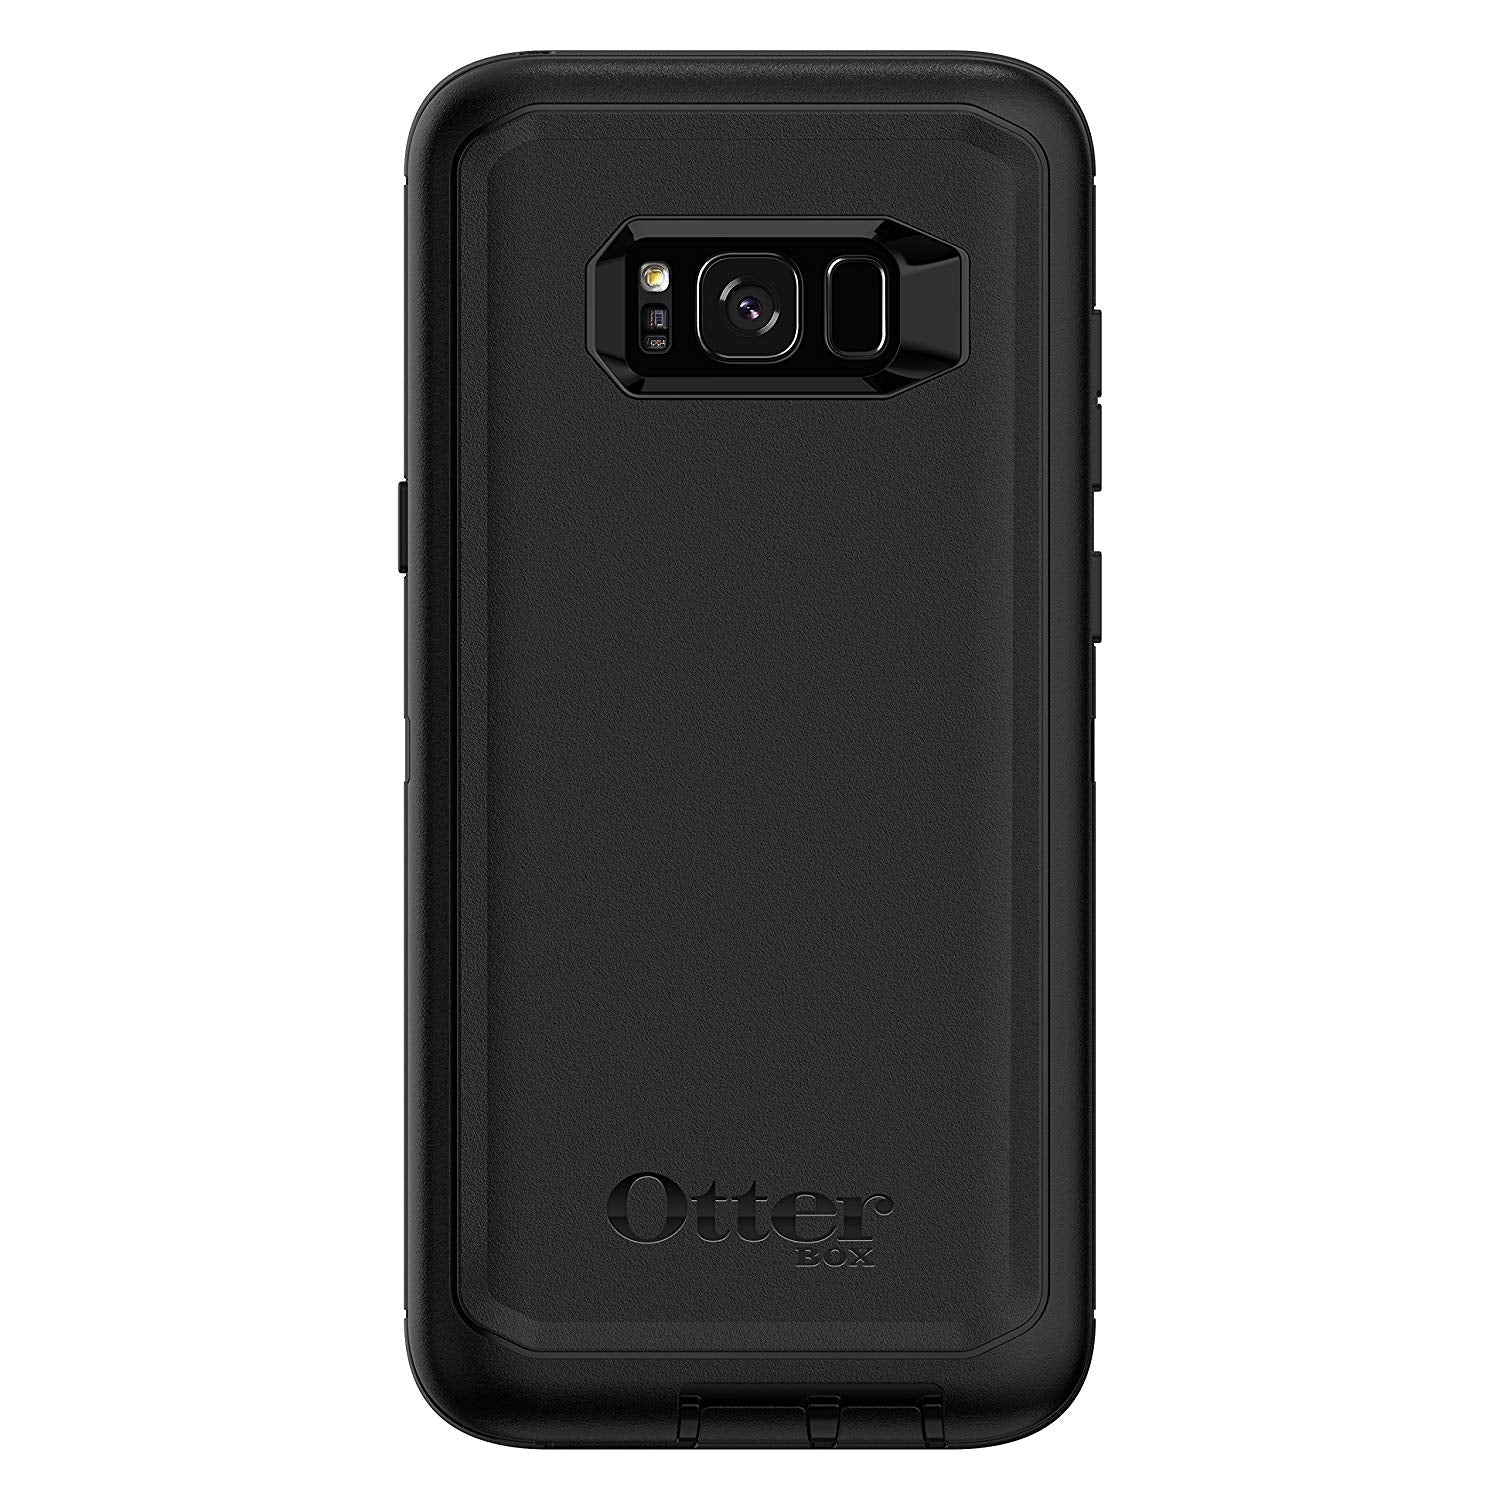 OtterBox DEFENDER SERIES Case &amp; Holster for Samsung Galaxy S8+ - Black (Certified Refurbished)